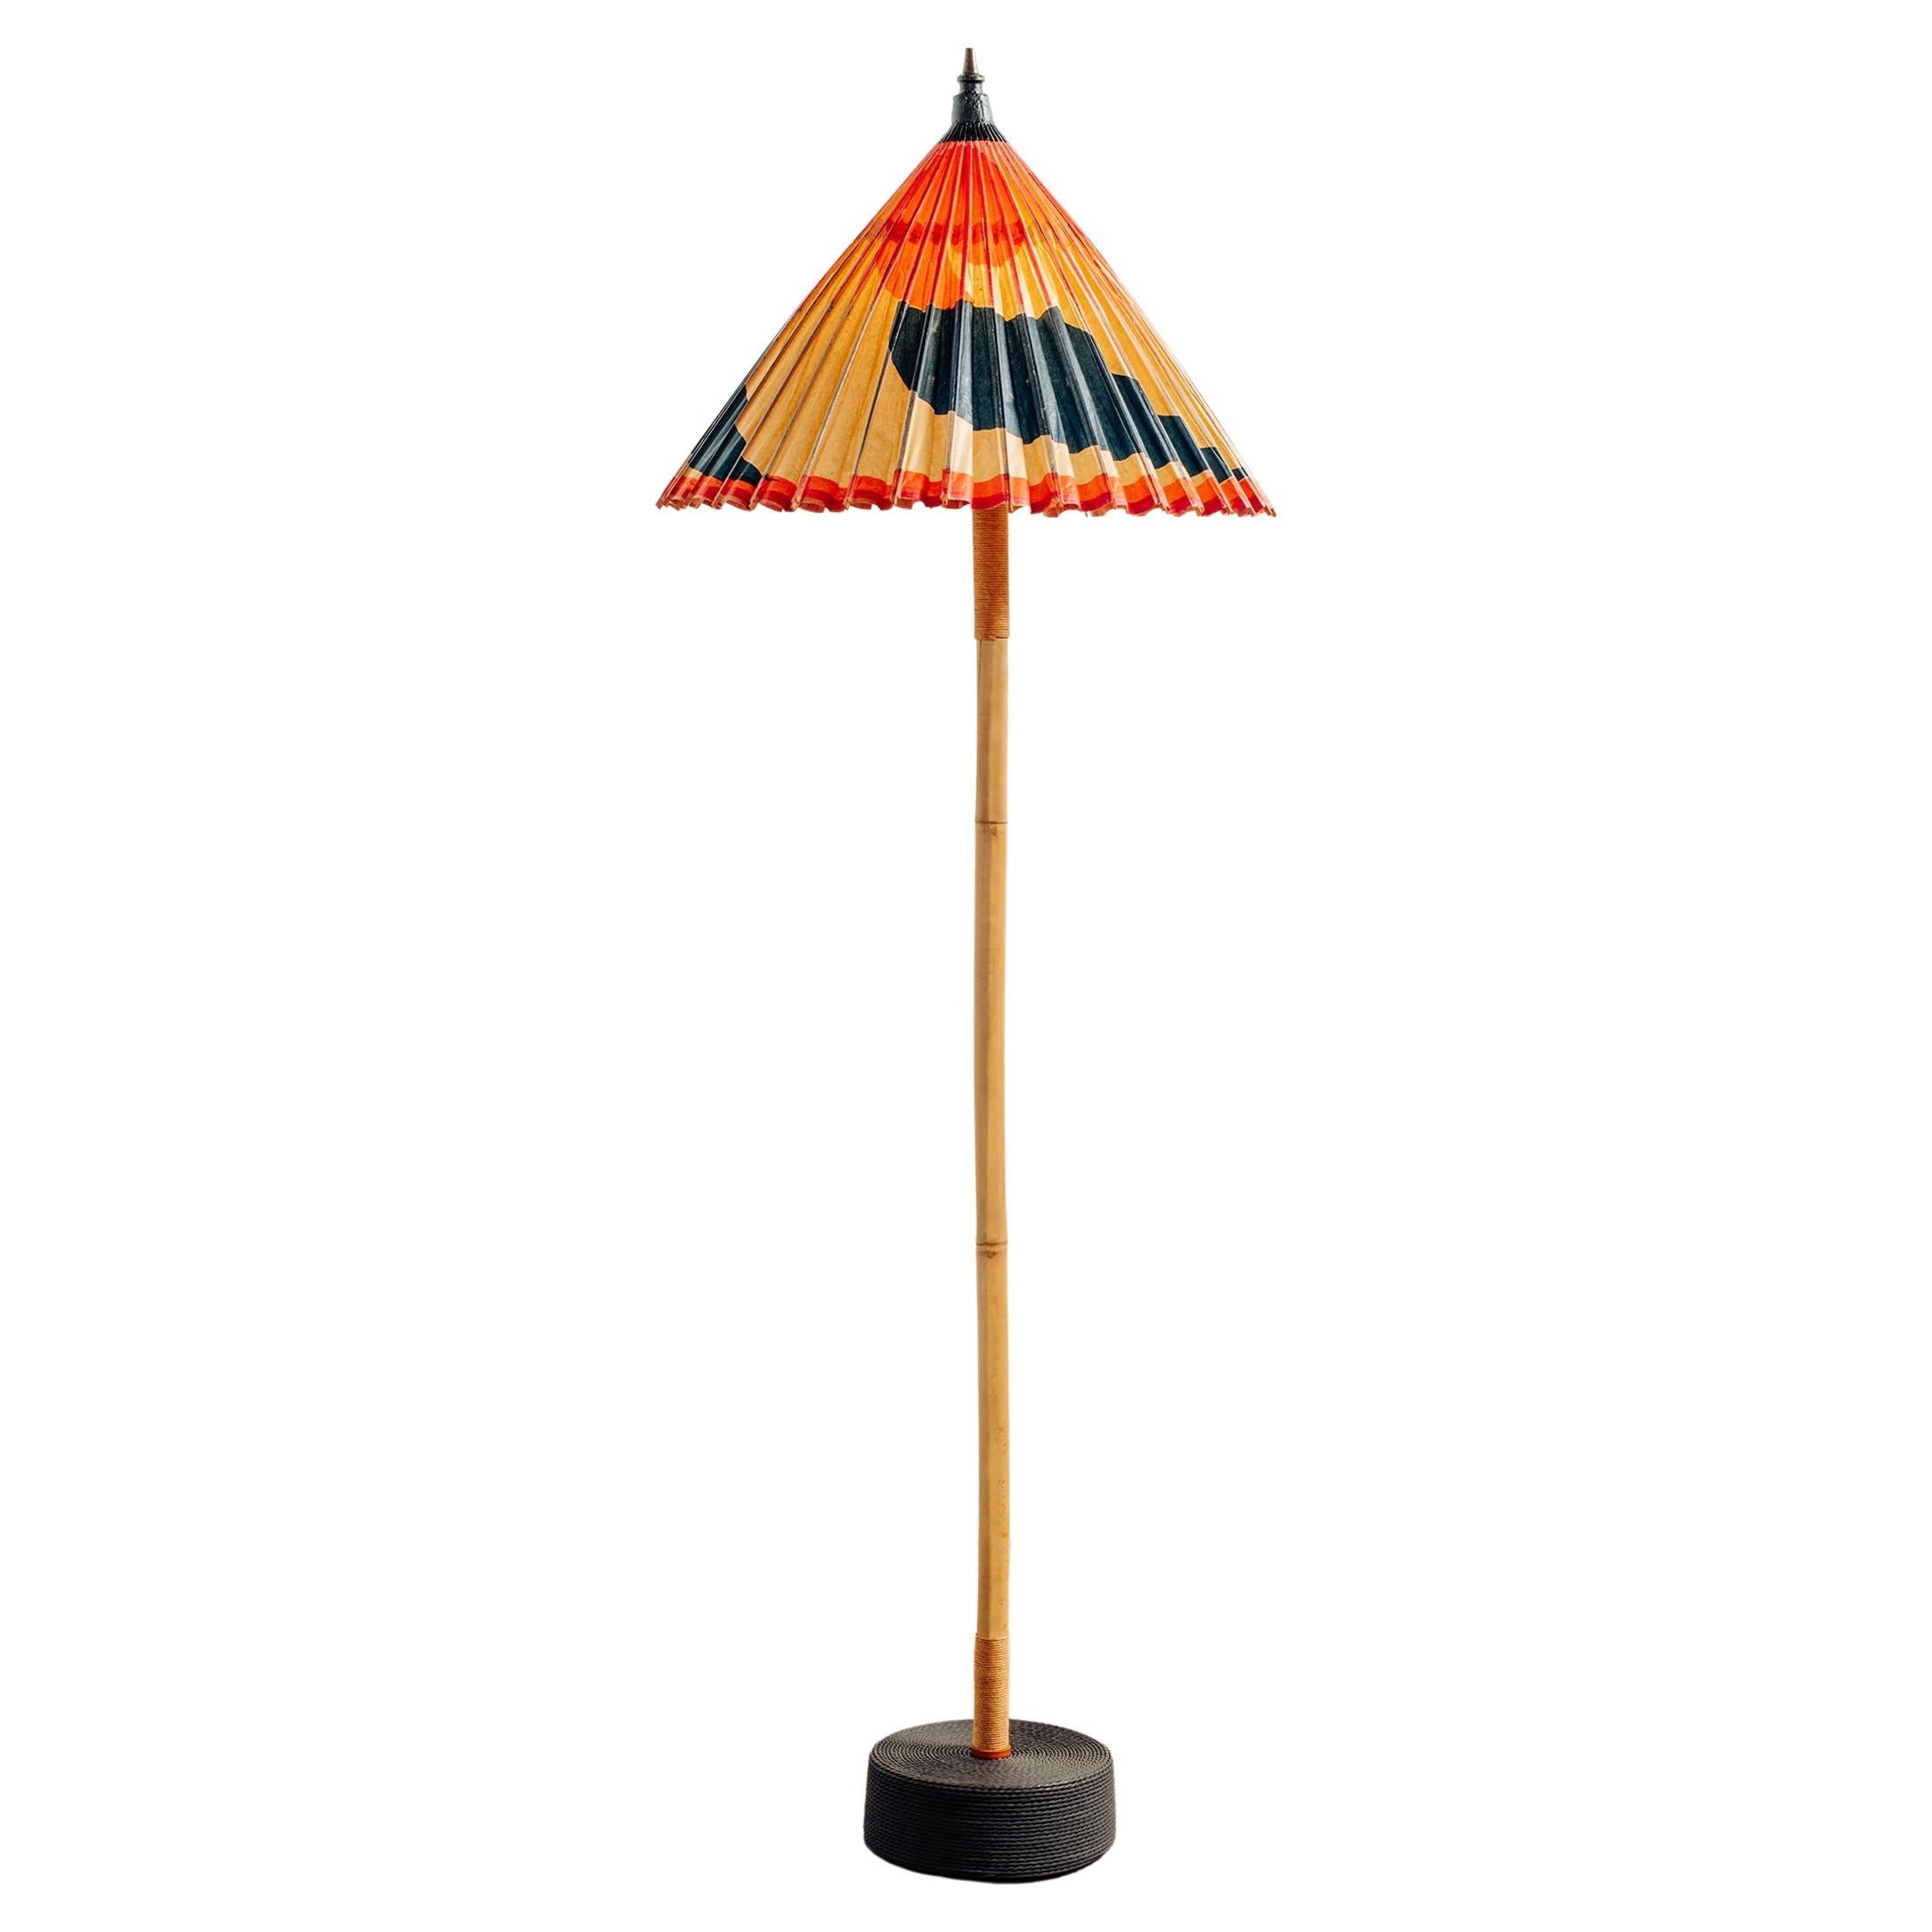 'World’s Fair' Bamboo Floor Lamp with Parasol Shade by Christopher Tennant For Sale